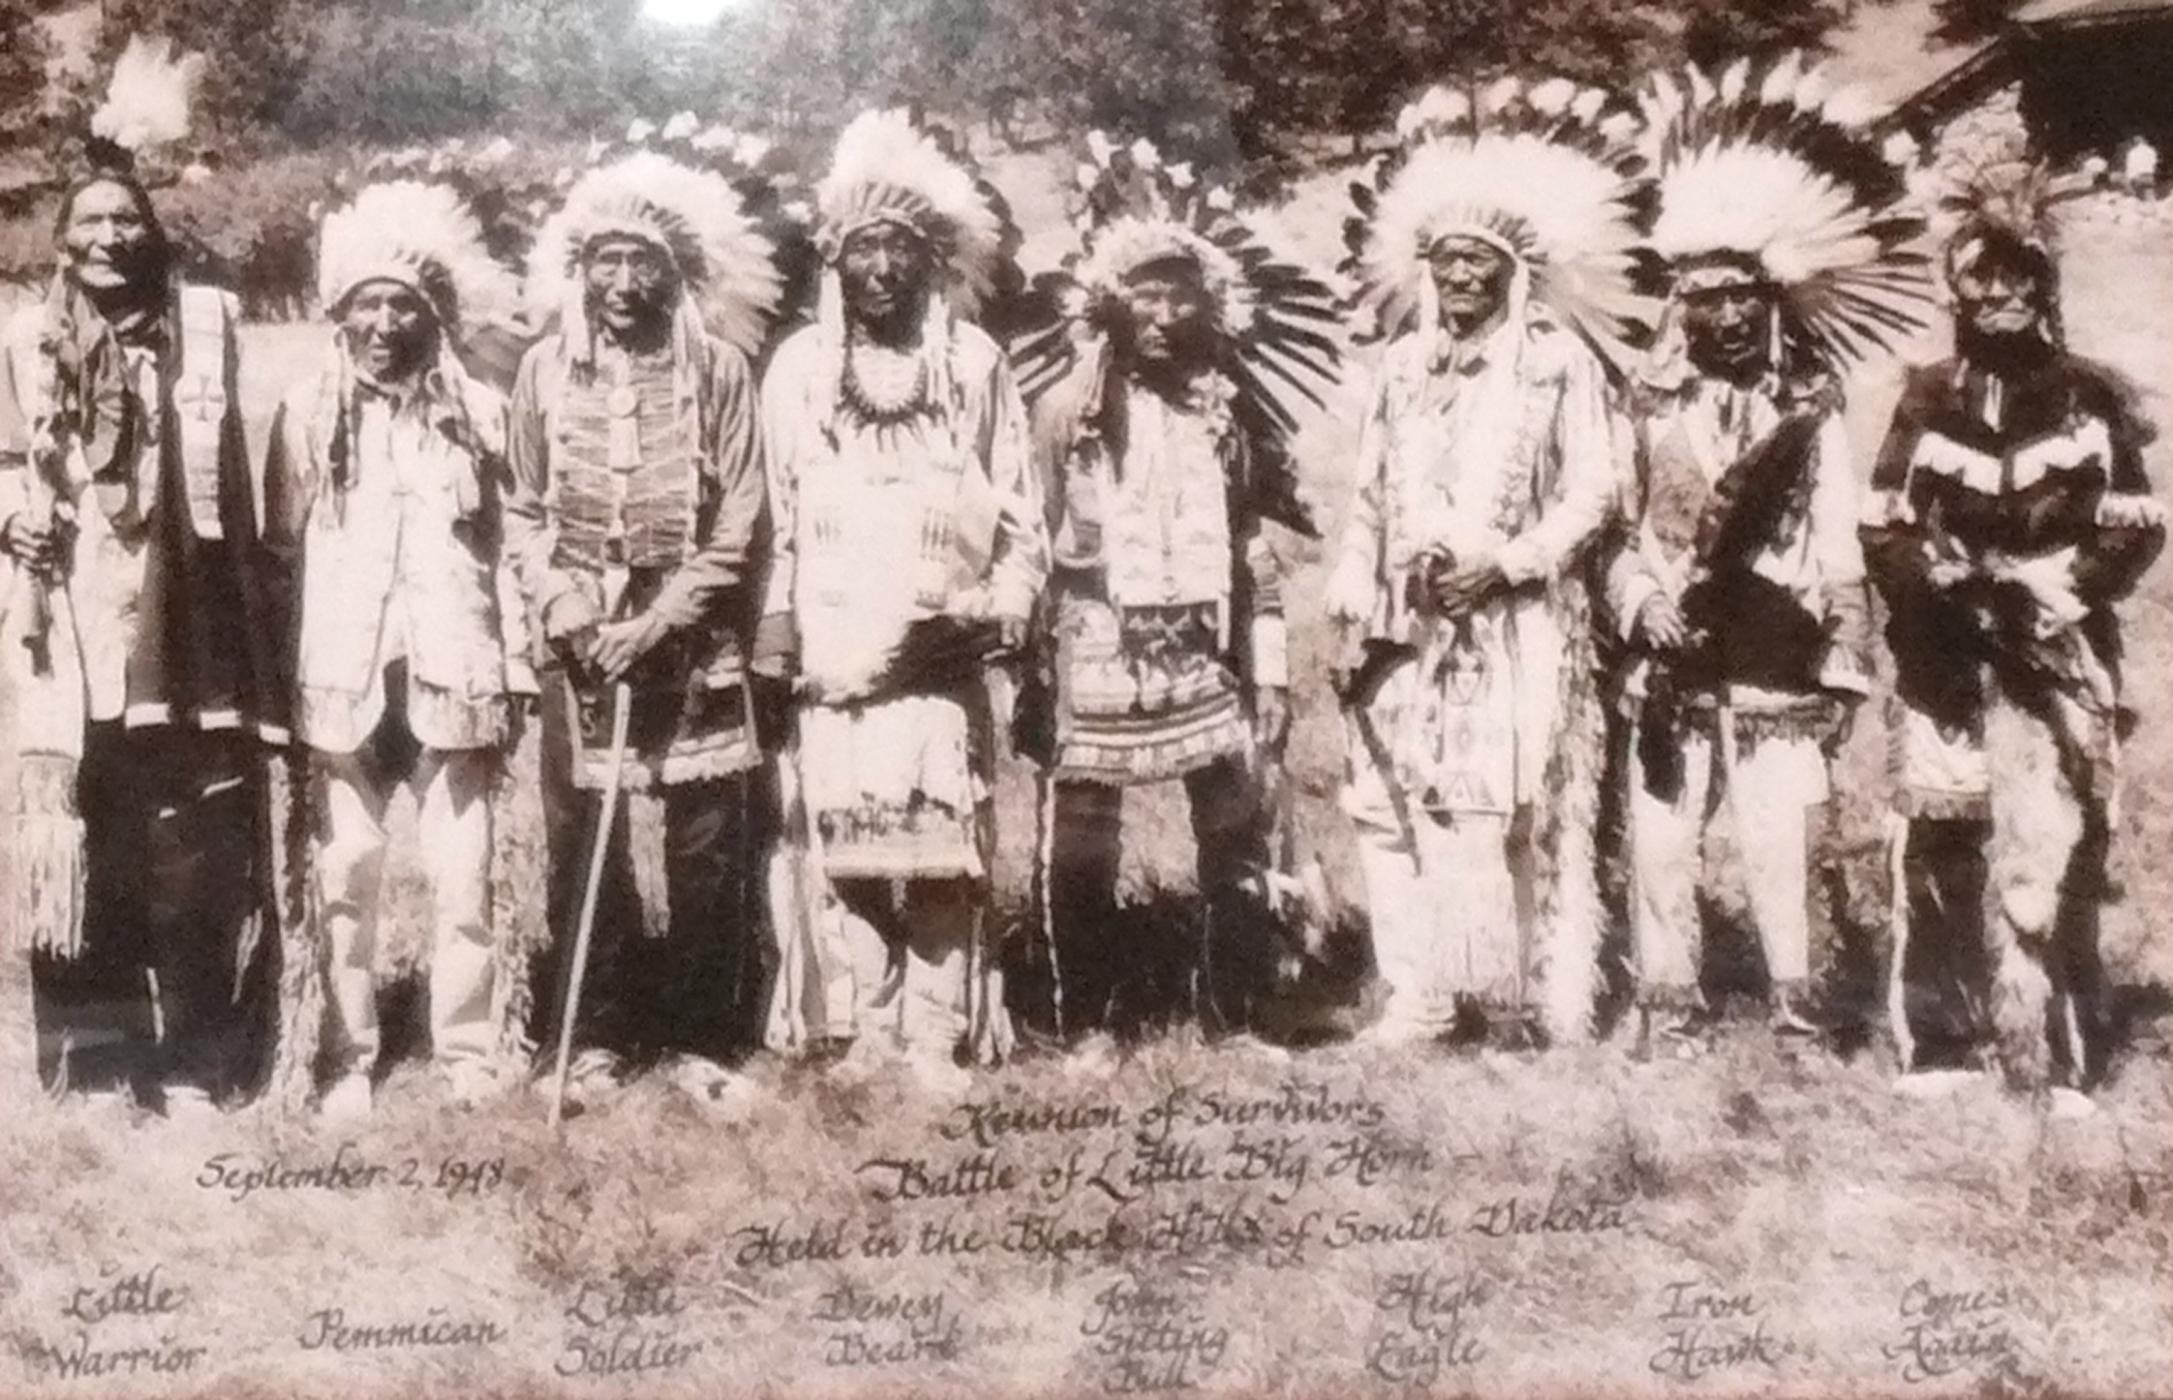 Native American Little Bighorn Survivors Photograph by Bill Groethe American Indians  For Sale